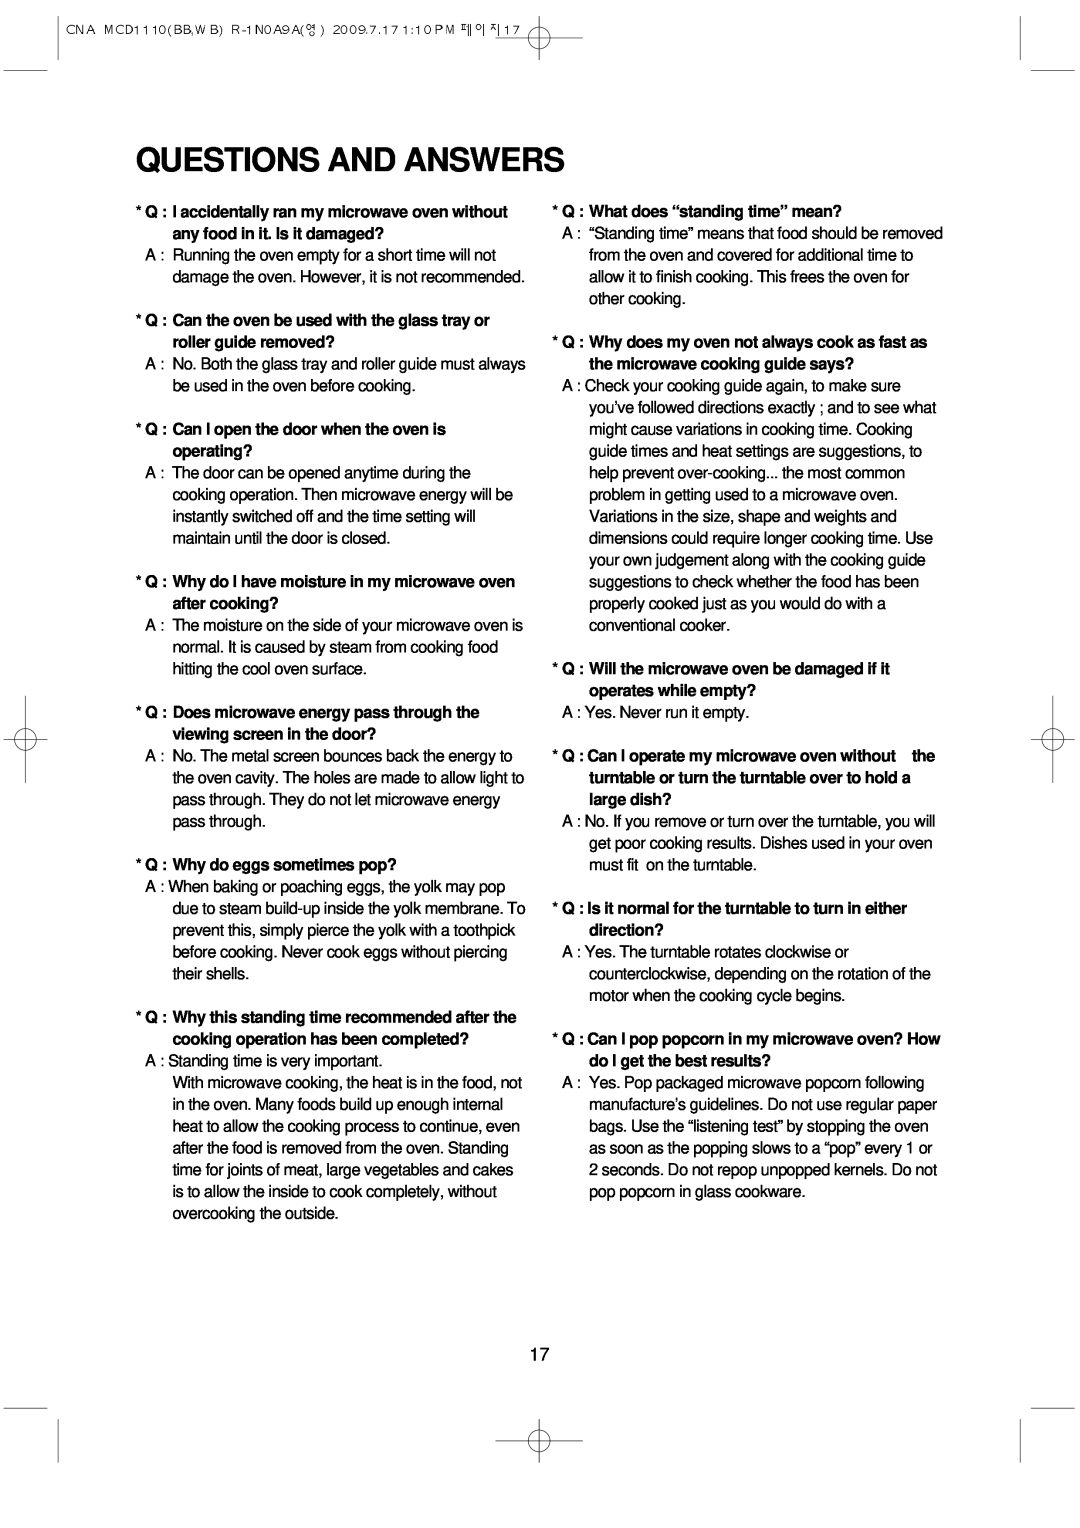 Magic Chef MCD1110WB manual Questions And Answers 